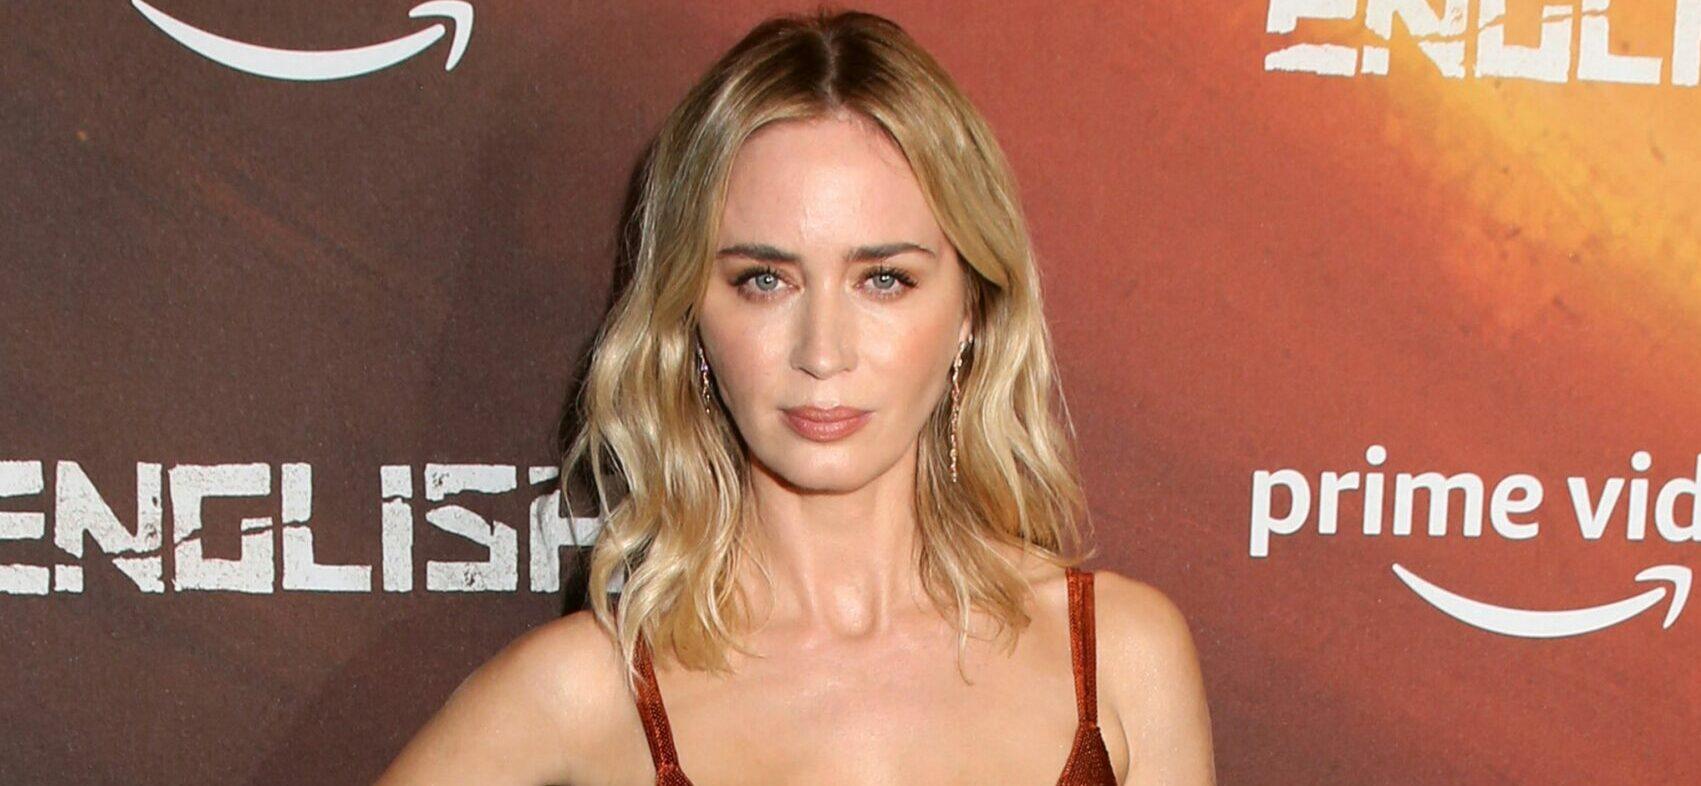 Emily Blunt Says She Is Not ‘Quitting Hollywood’ And That Comment About Taking A Break ‘Got So Overblown’